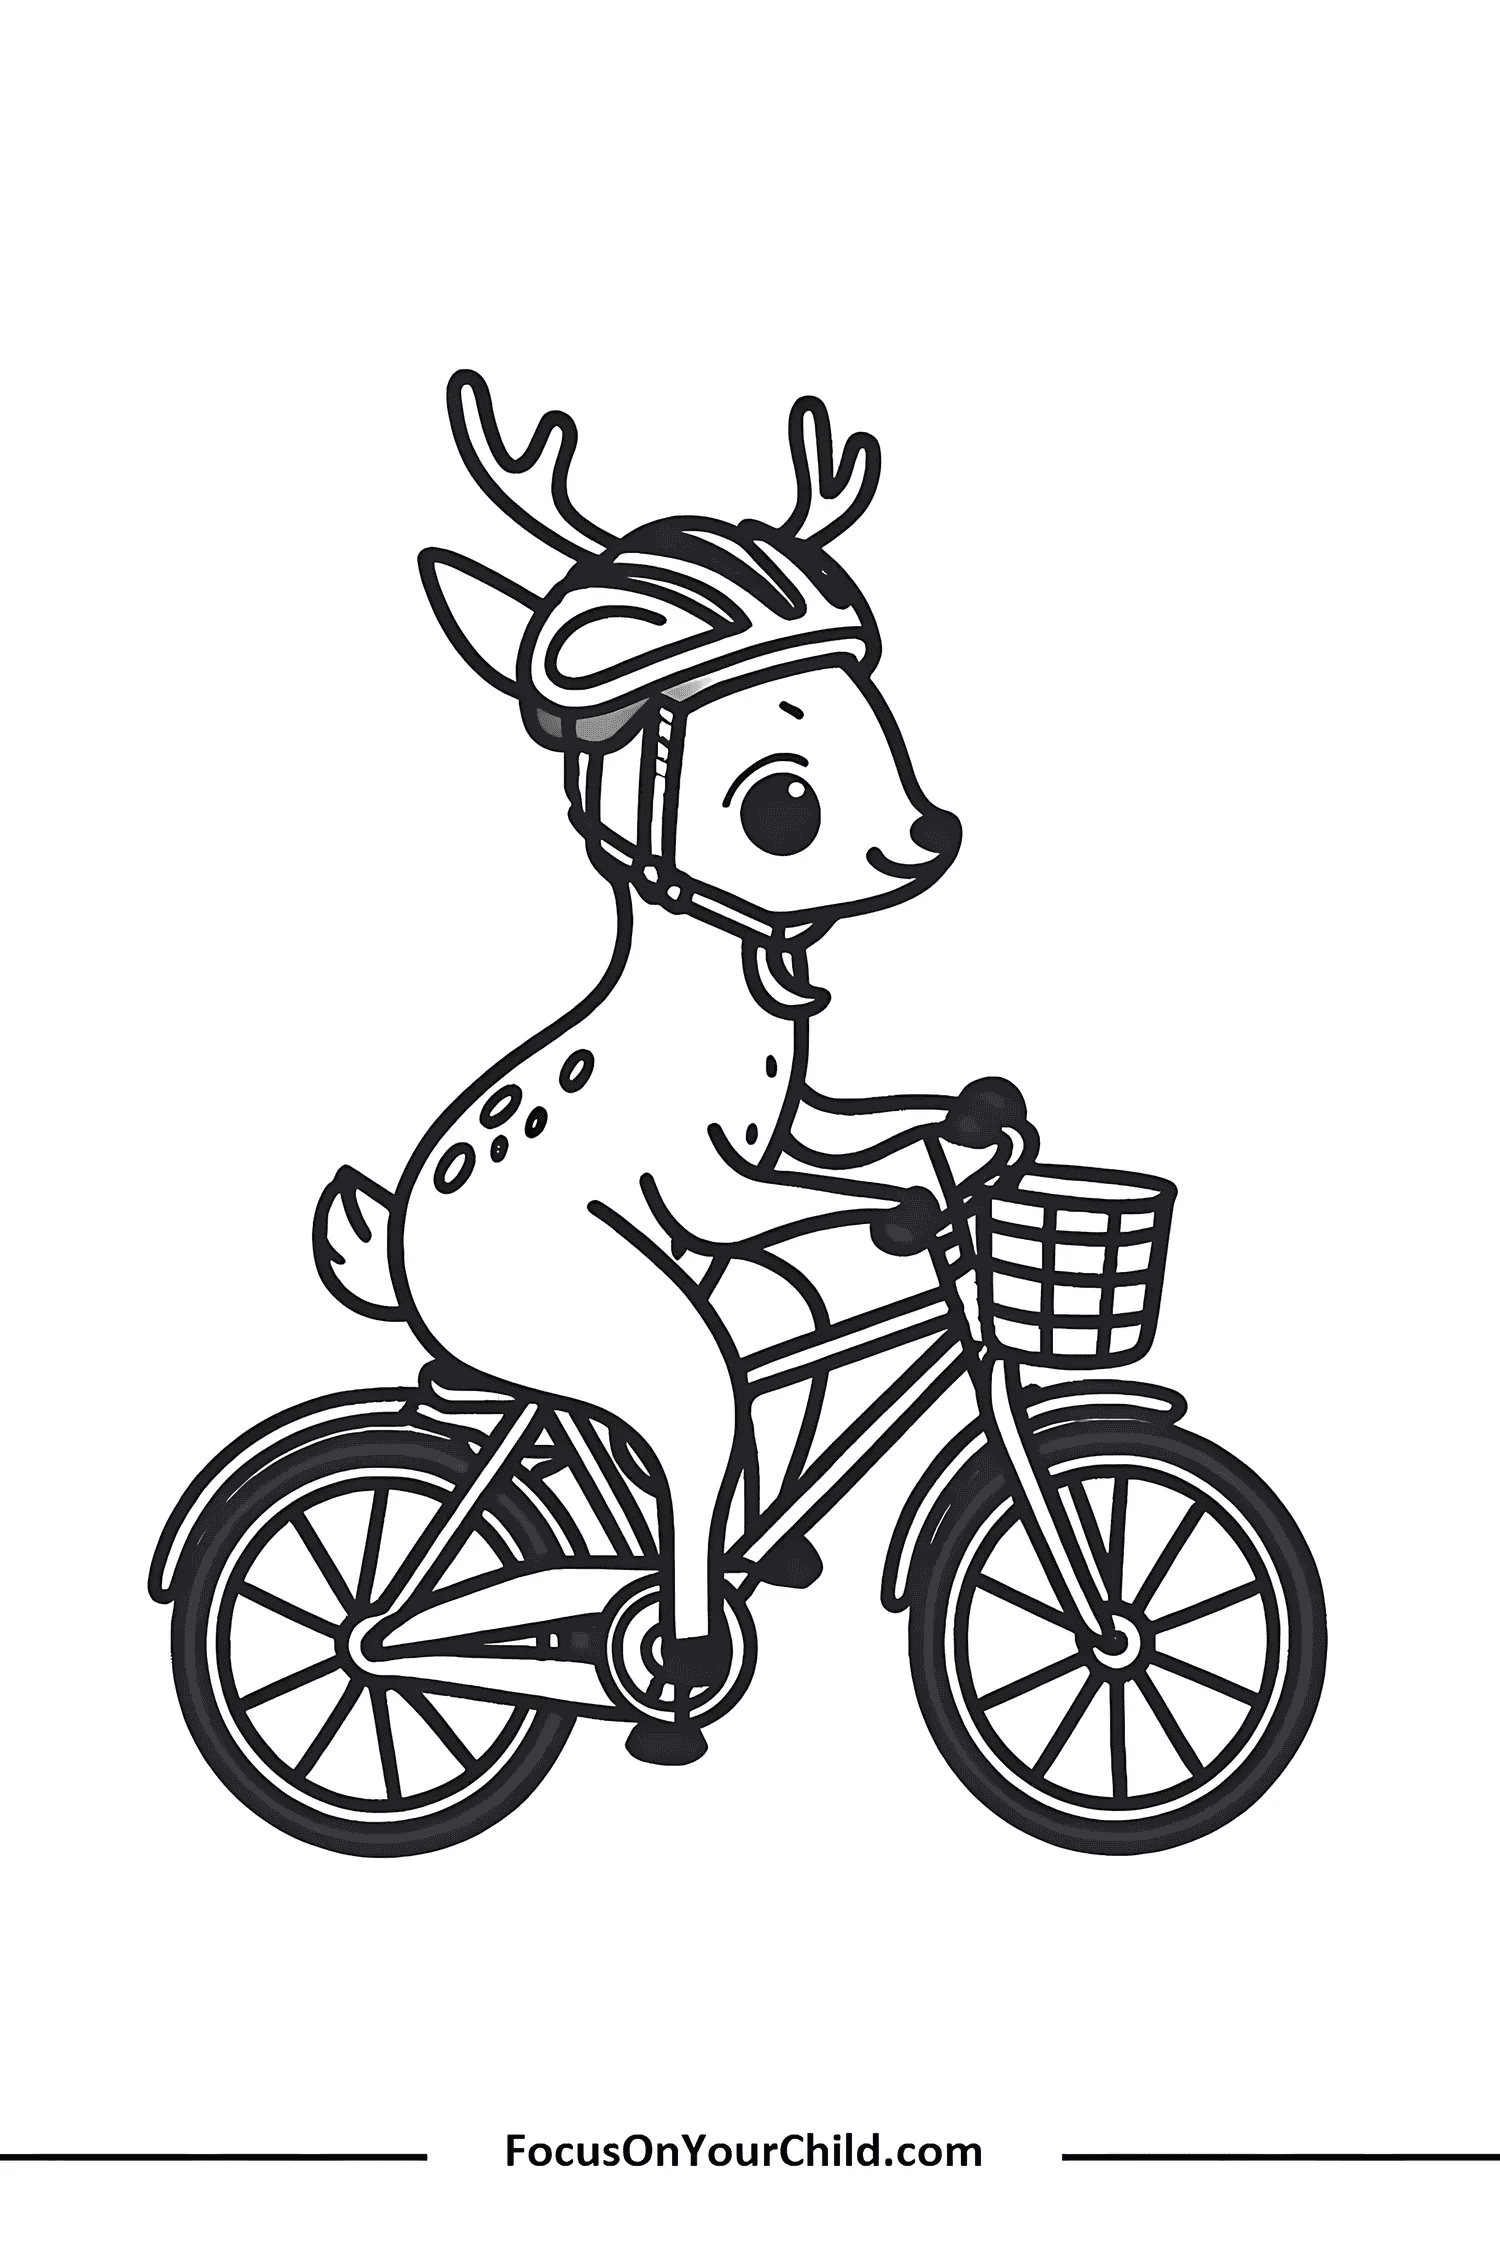 Whimsical deer riding bicycle coloring page for children.